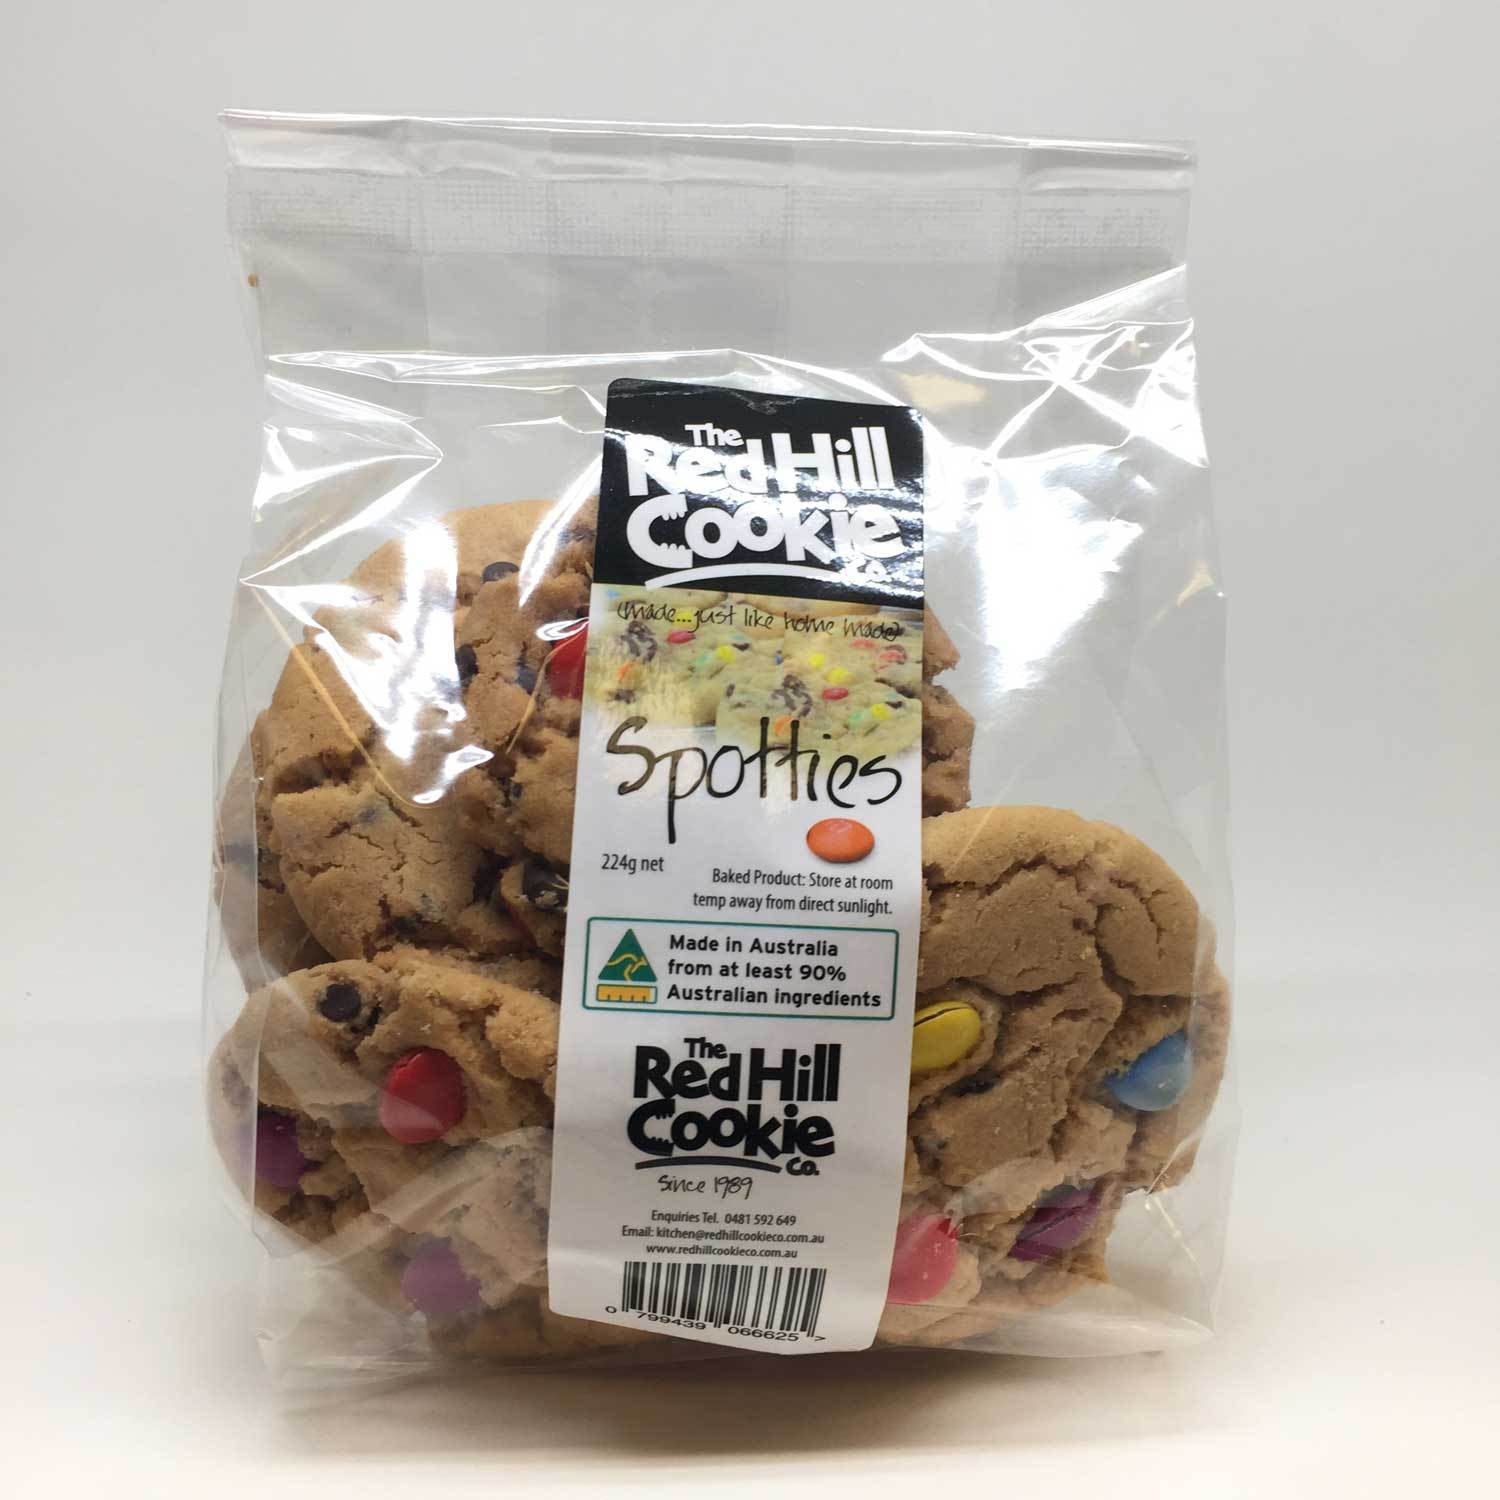 The Red Hill Cookie Co Spotties Cookies 240g-The Red Hill Cookie Co-Fresh Connection